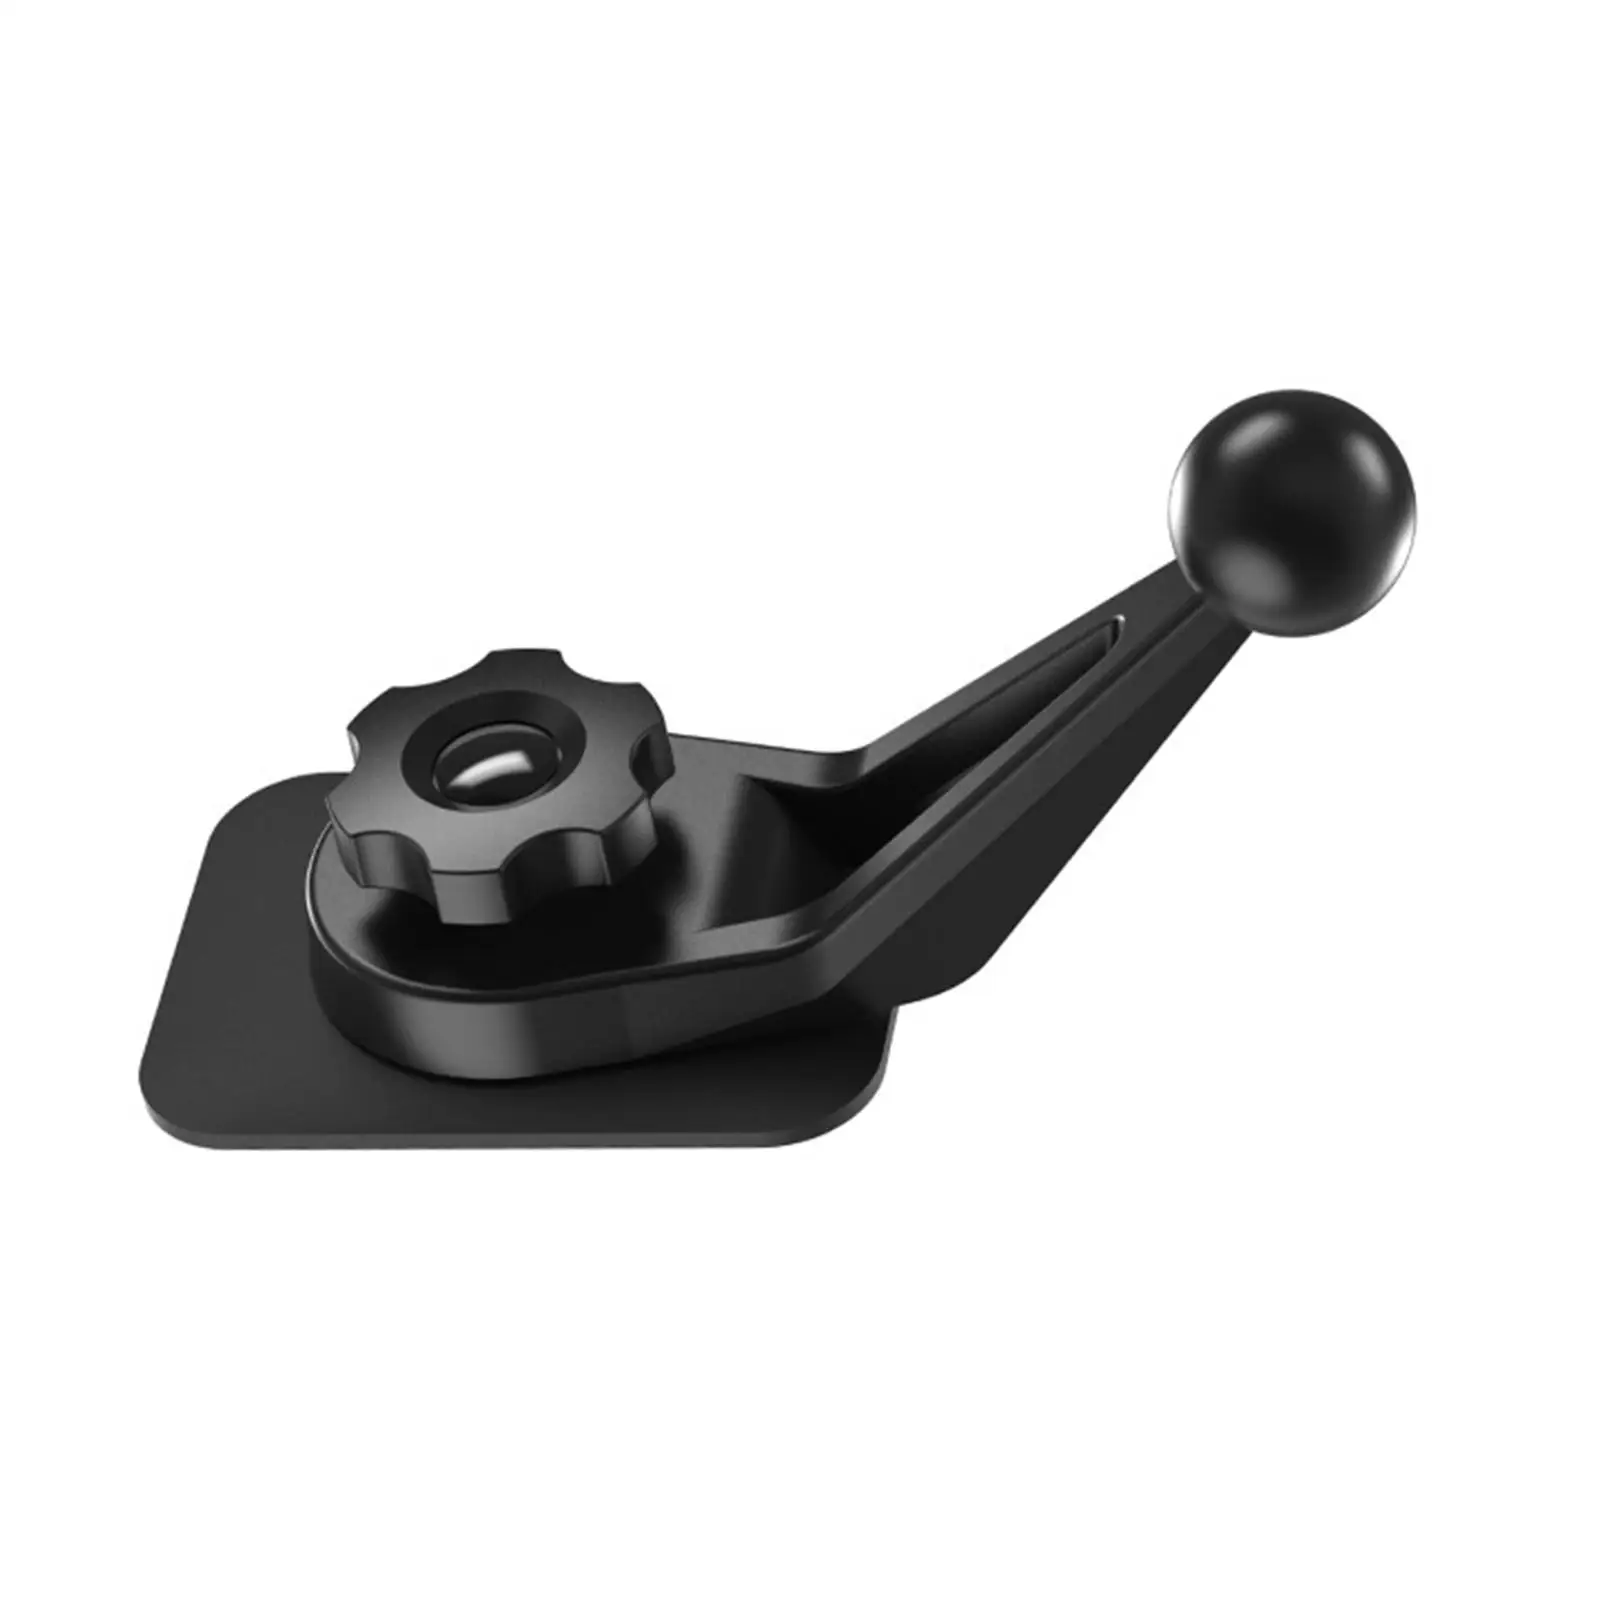 Bracket Auto Accessory 360 Rotating Phone Holder Base Adapter for Mobile Phone Black